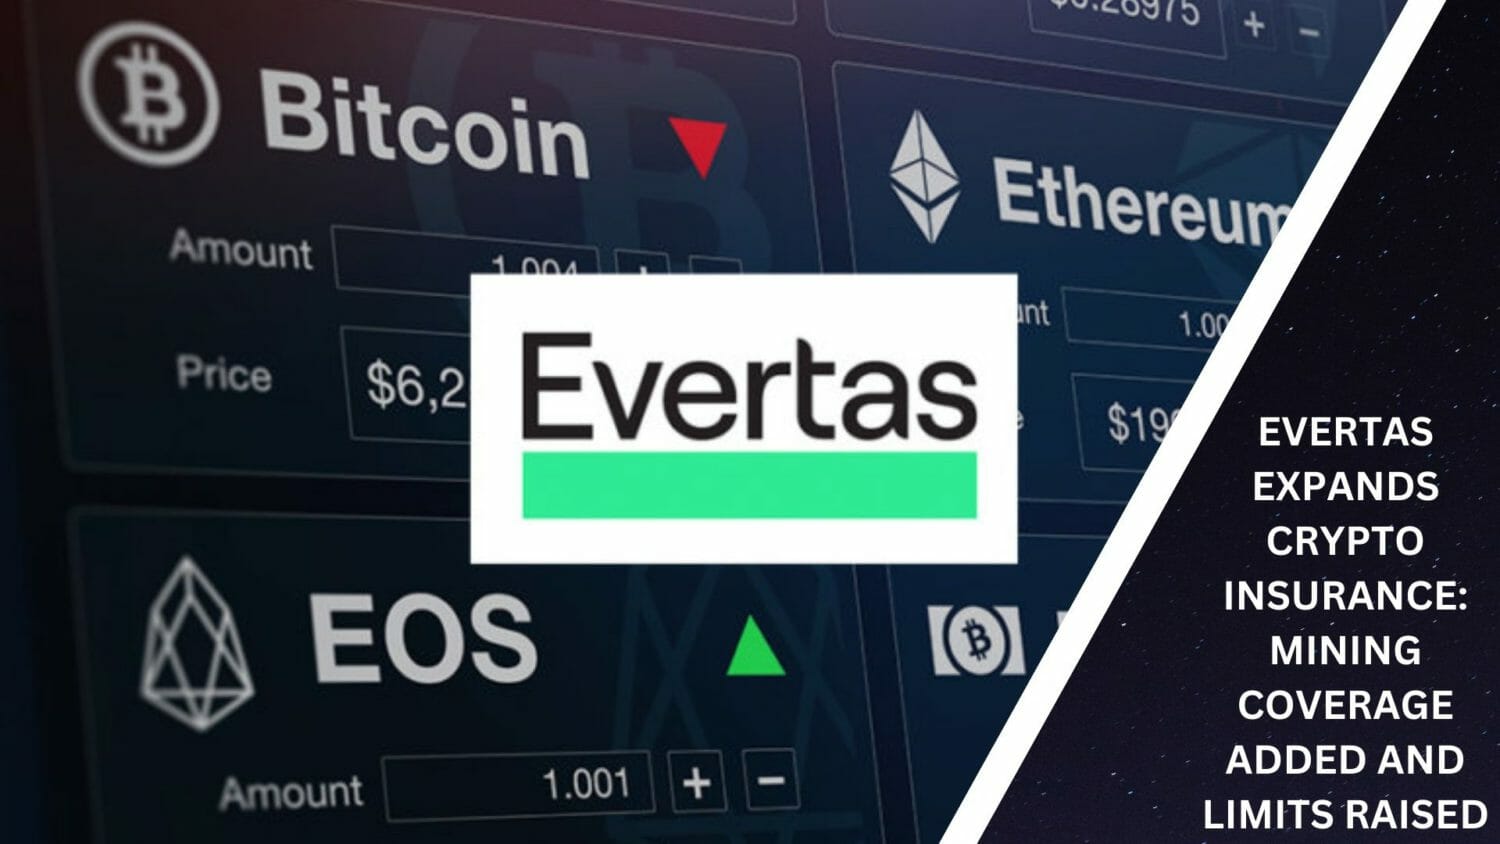 Evertas Expands Crypto Insurance: Mining Coverage Added And Limits Raised